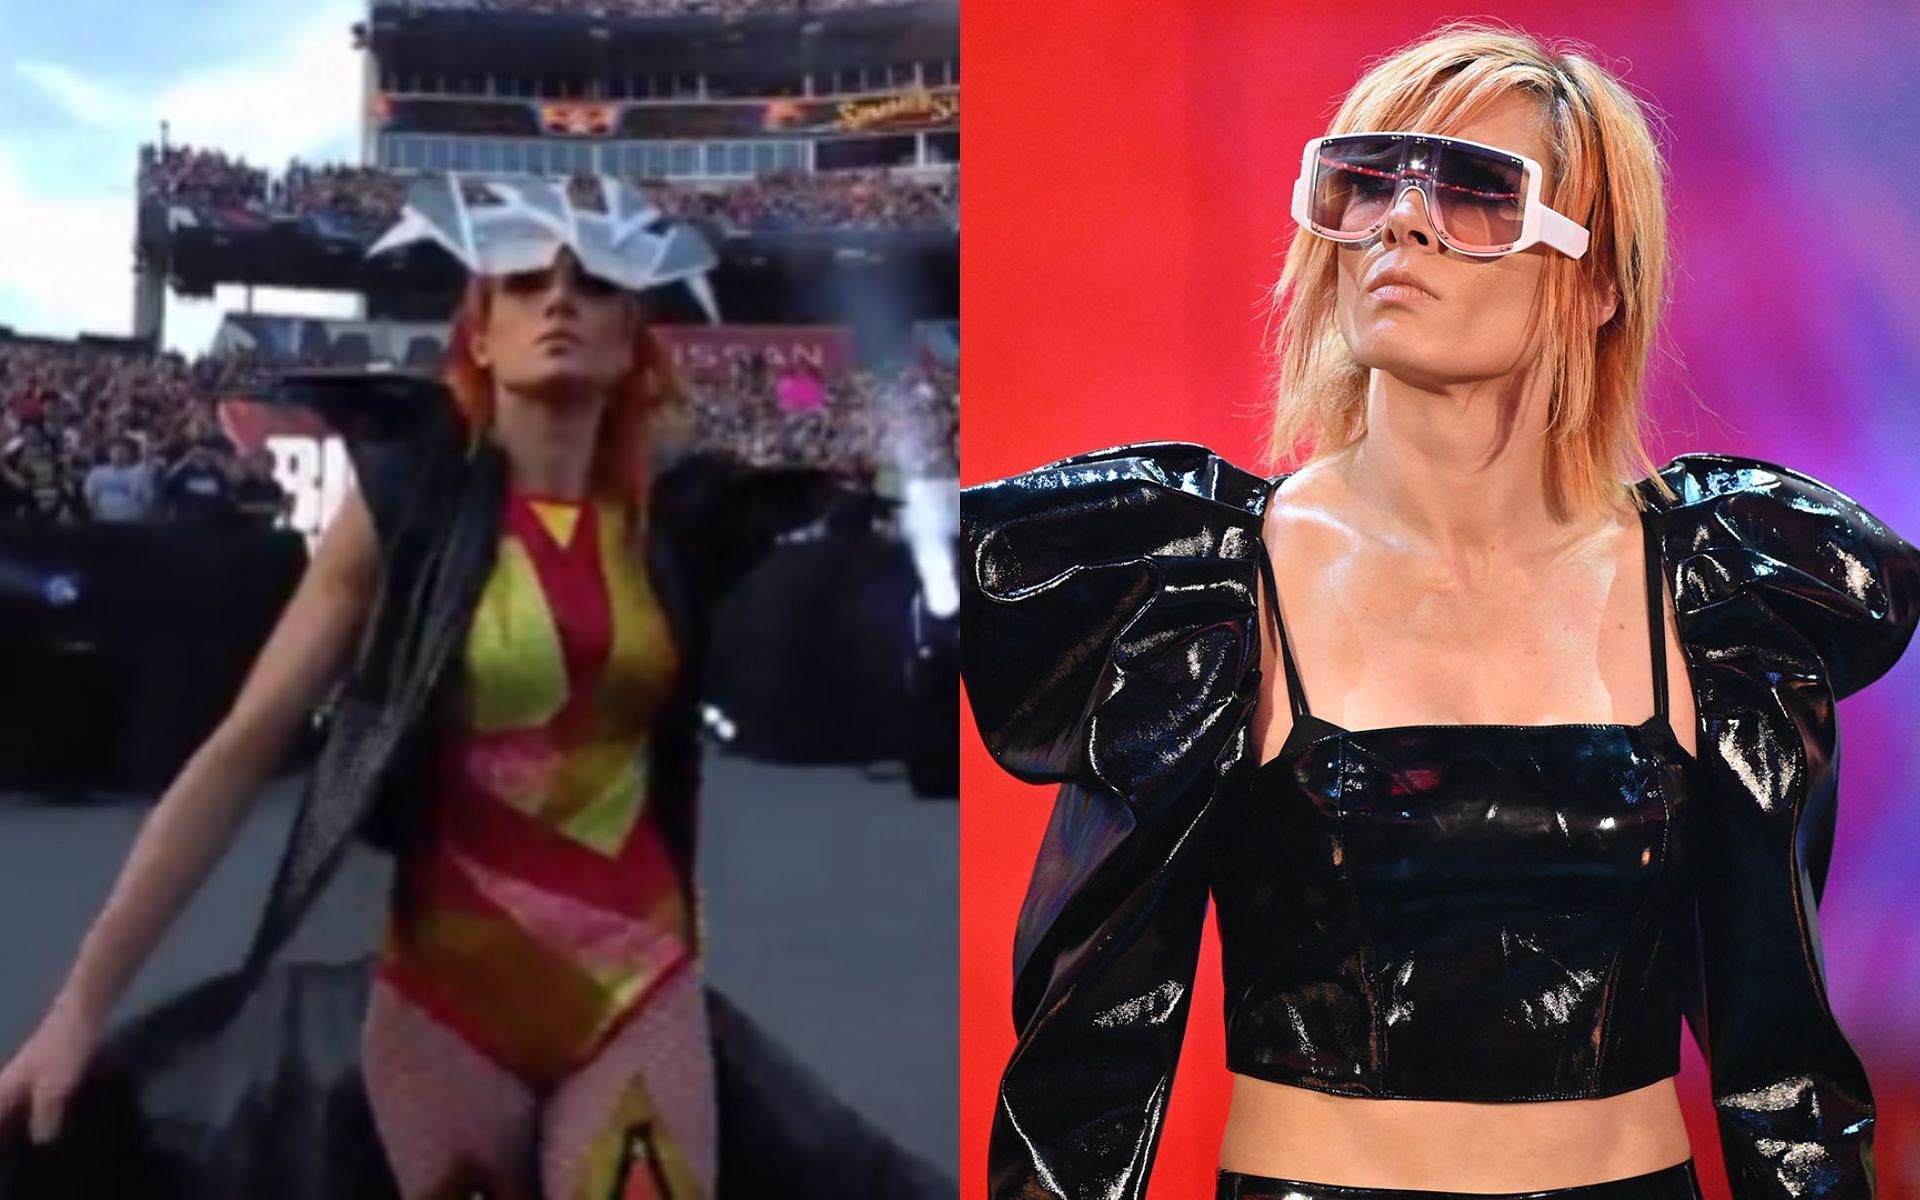 Becky Lynch has captivated the WWE Universe with her diversified, unique sense of style.